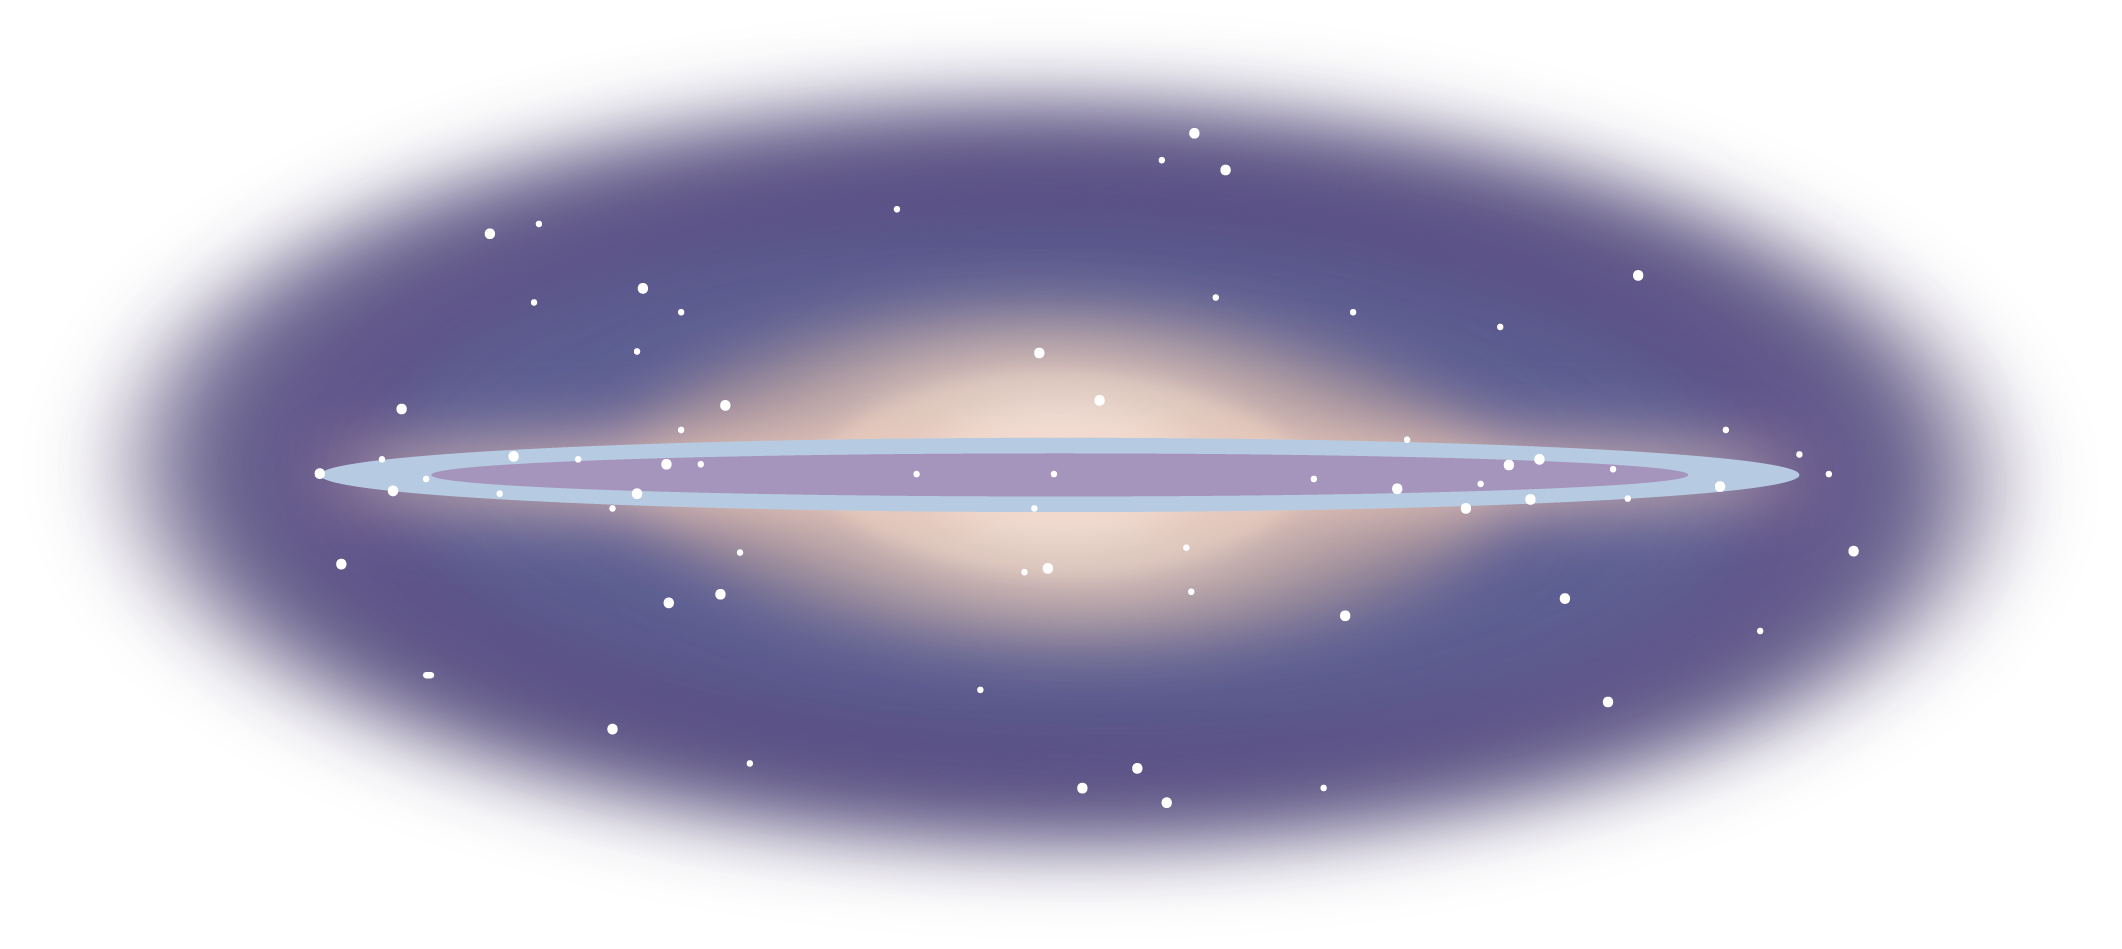 An illustration has an elongated oval in light purple stretching across the center, outlined in light blue. Behind the strip is a diffuse, yellowish cloud of color that fades into a medium, bright purple. All over the image are white speckles, representing stars.